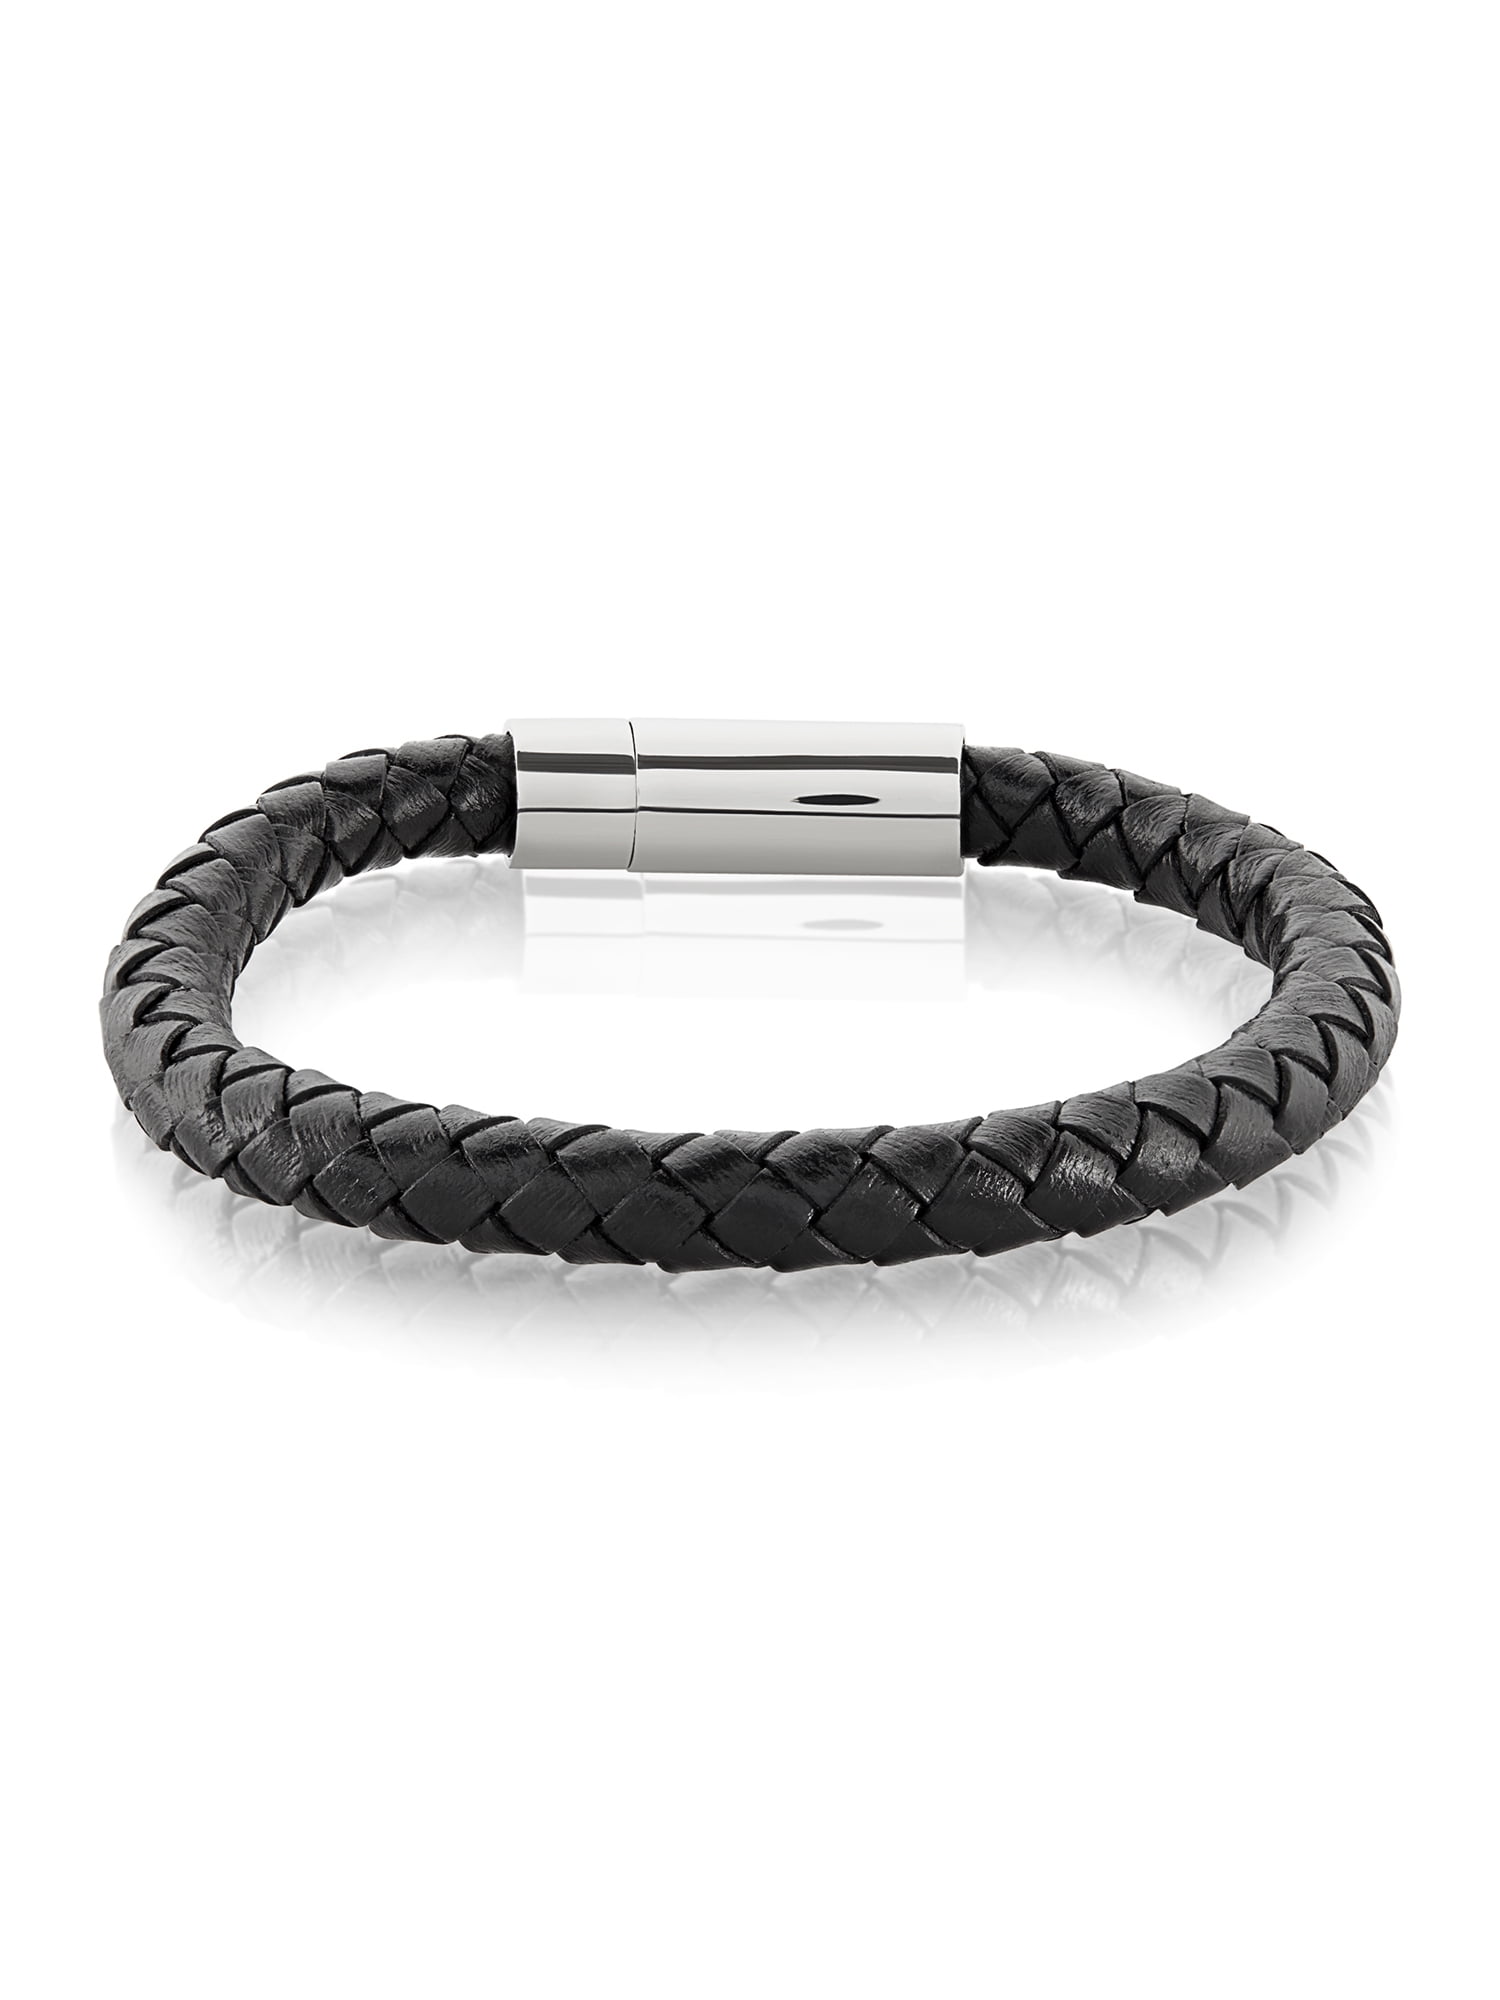 Crucible - Stainless Steel Braided Genuine Leather Bracelet (8mm) - 8.5 ...